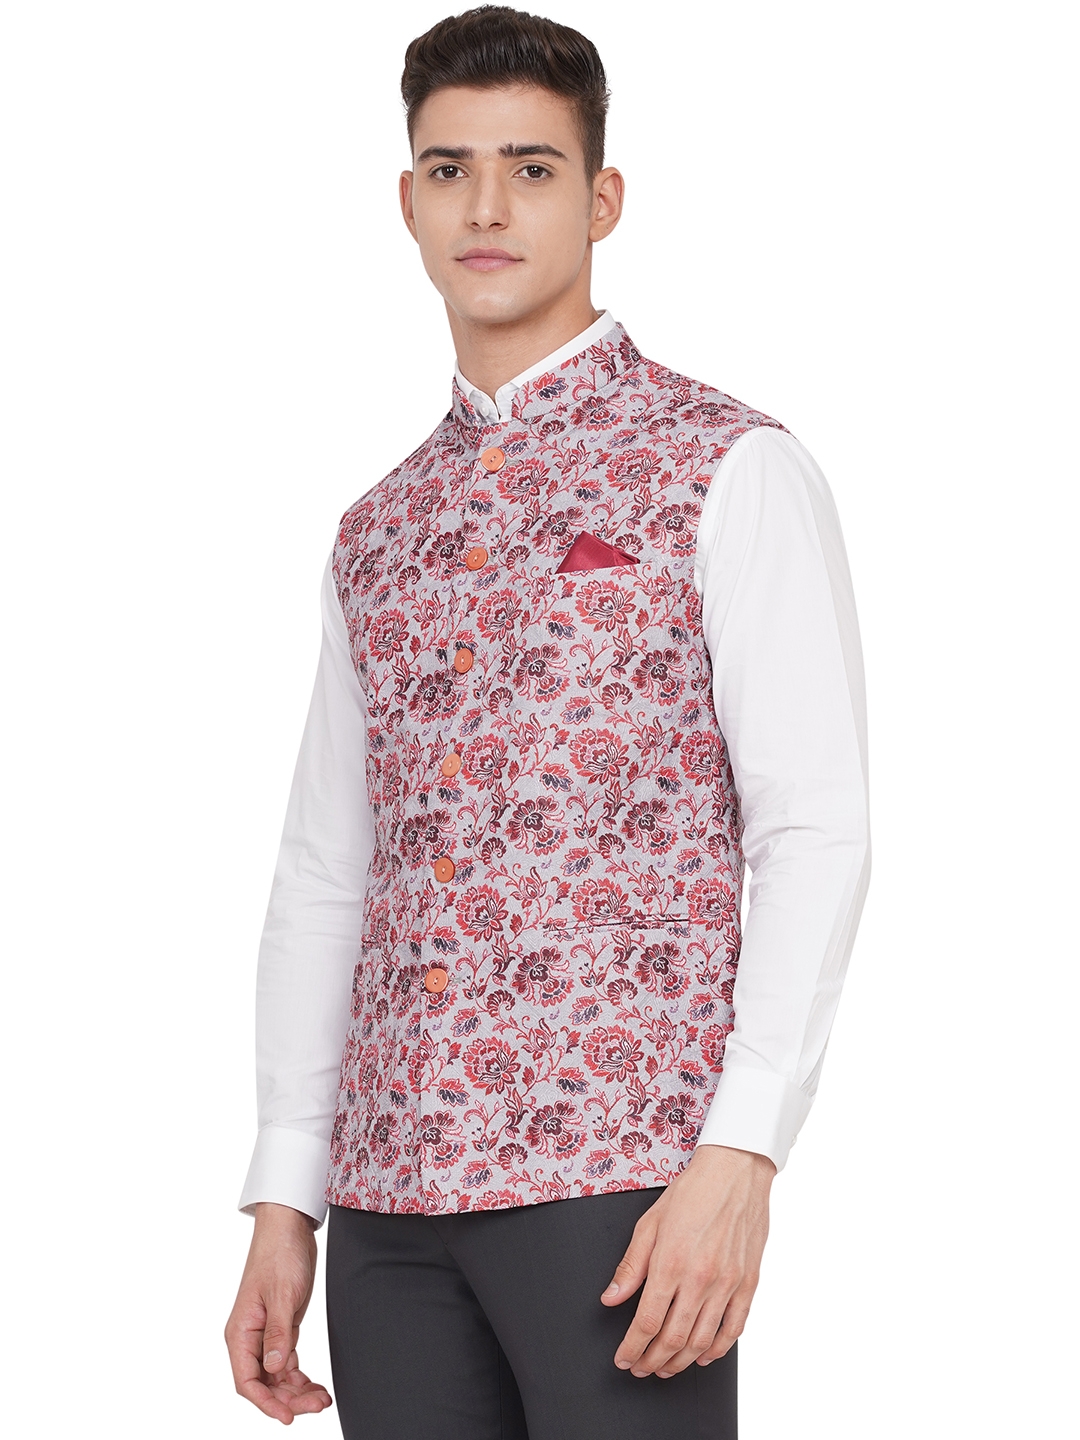 TFX 481-D GREY RED FLORAL PRINT